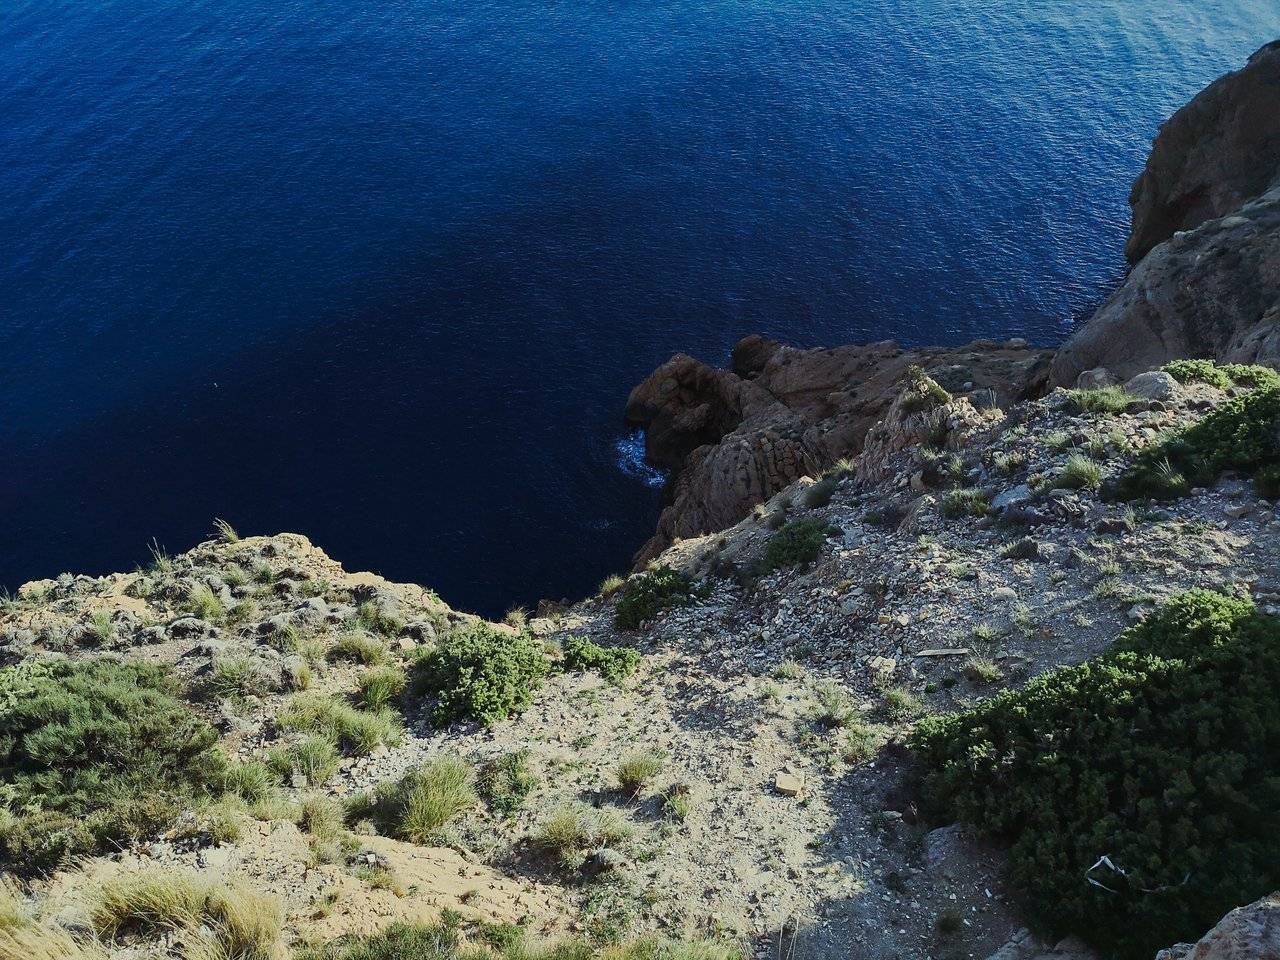   At the point, where Albir lighthouse was built, the height of the cliff facing the sea is about 112m. Photo by Alis Monte [CC BY-SA 4.0], via Connecting the Dots